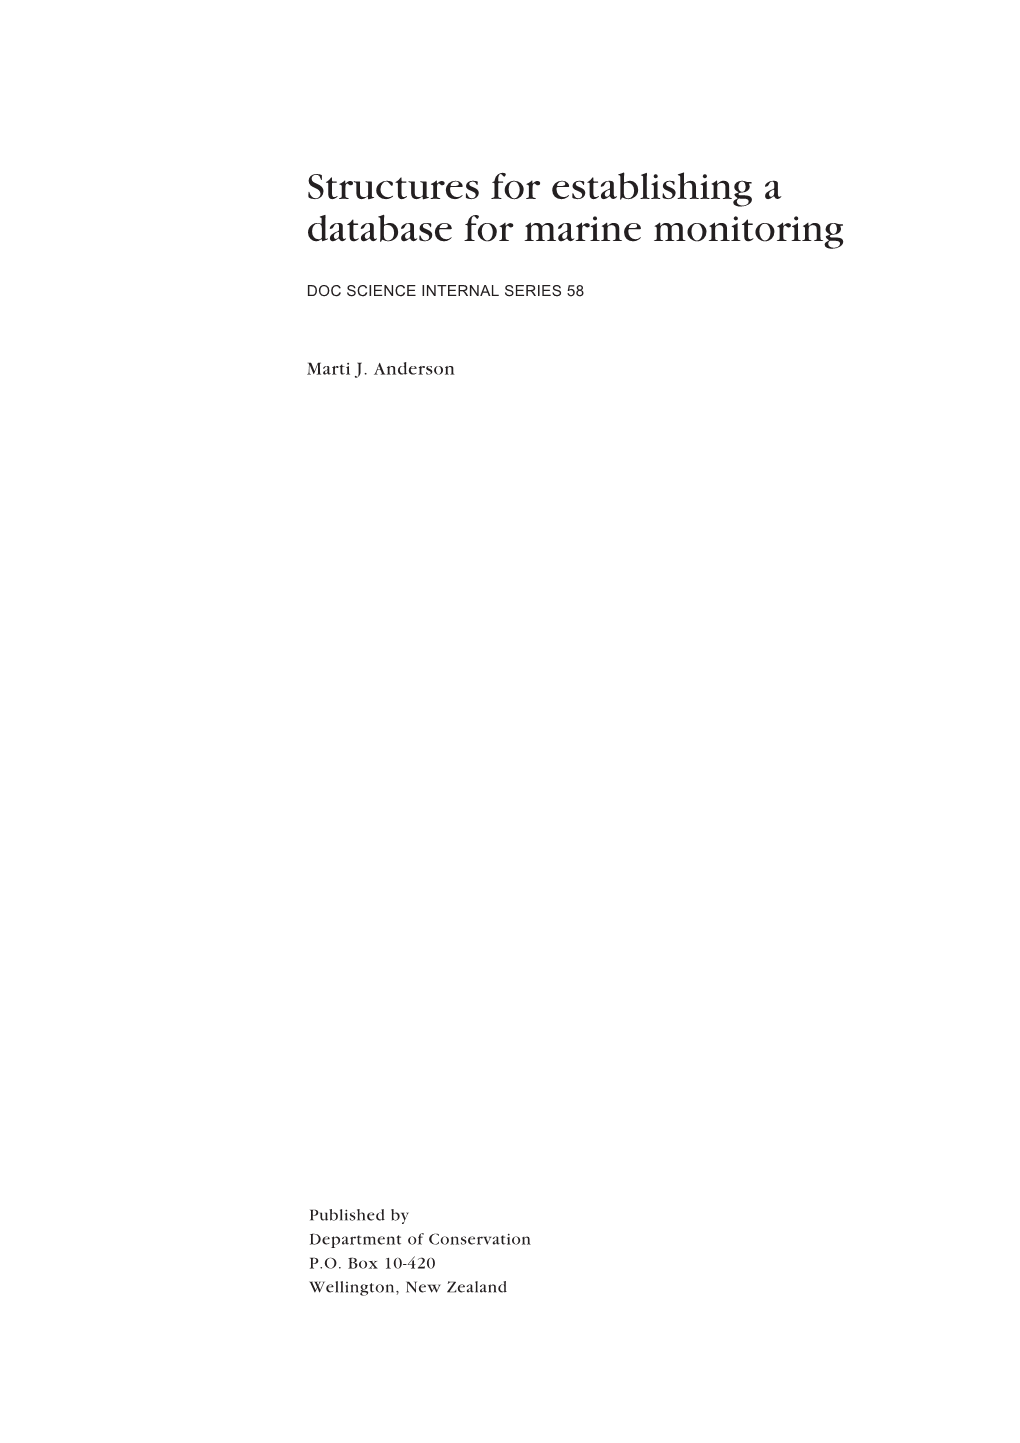 Structures for Establishing a Database for Marine Monitoring